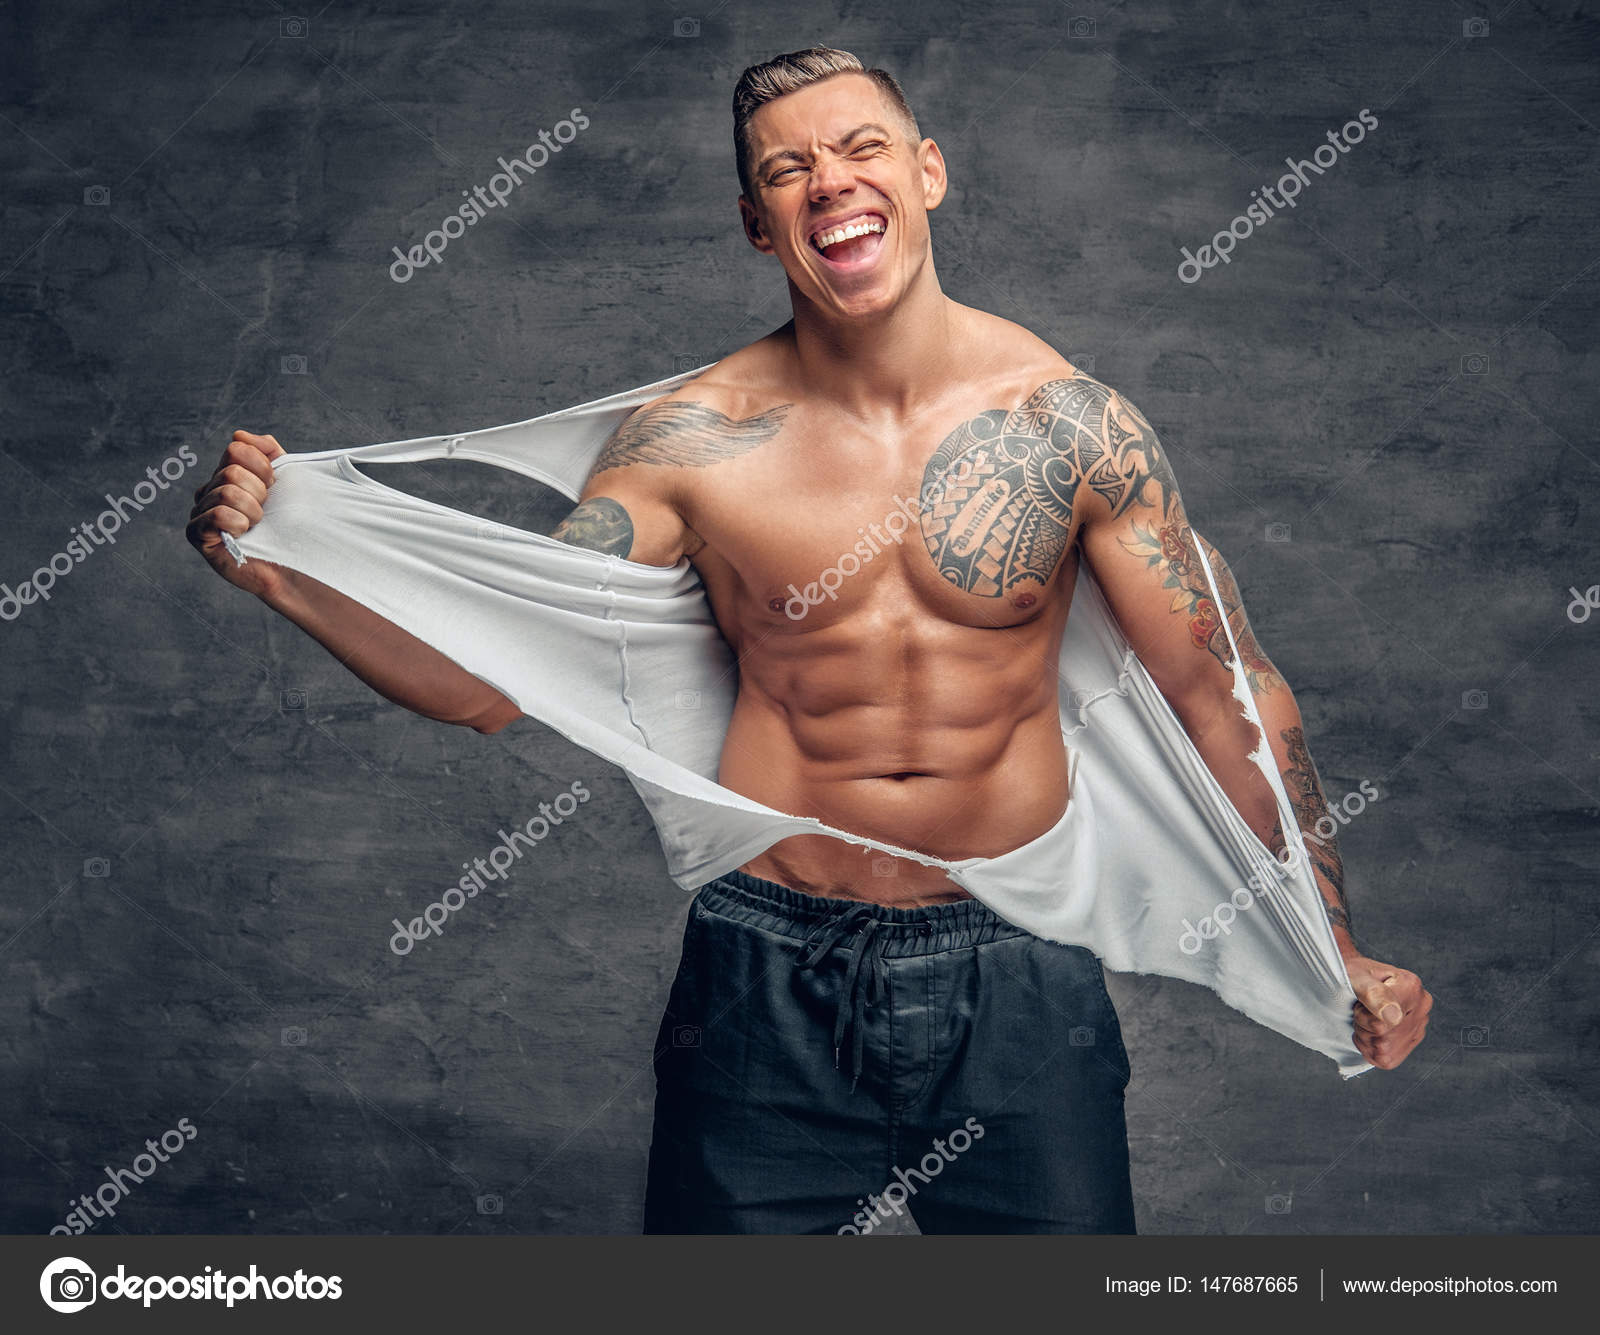 Athletic male with a tattoo ripping t shirt on his chest. Stock Photo by  ©fxquadro 147687665